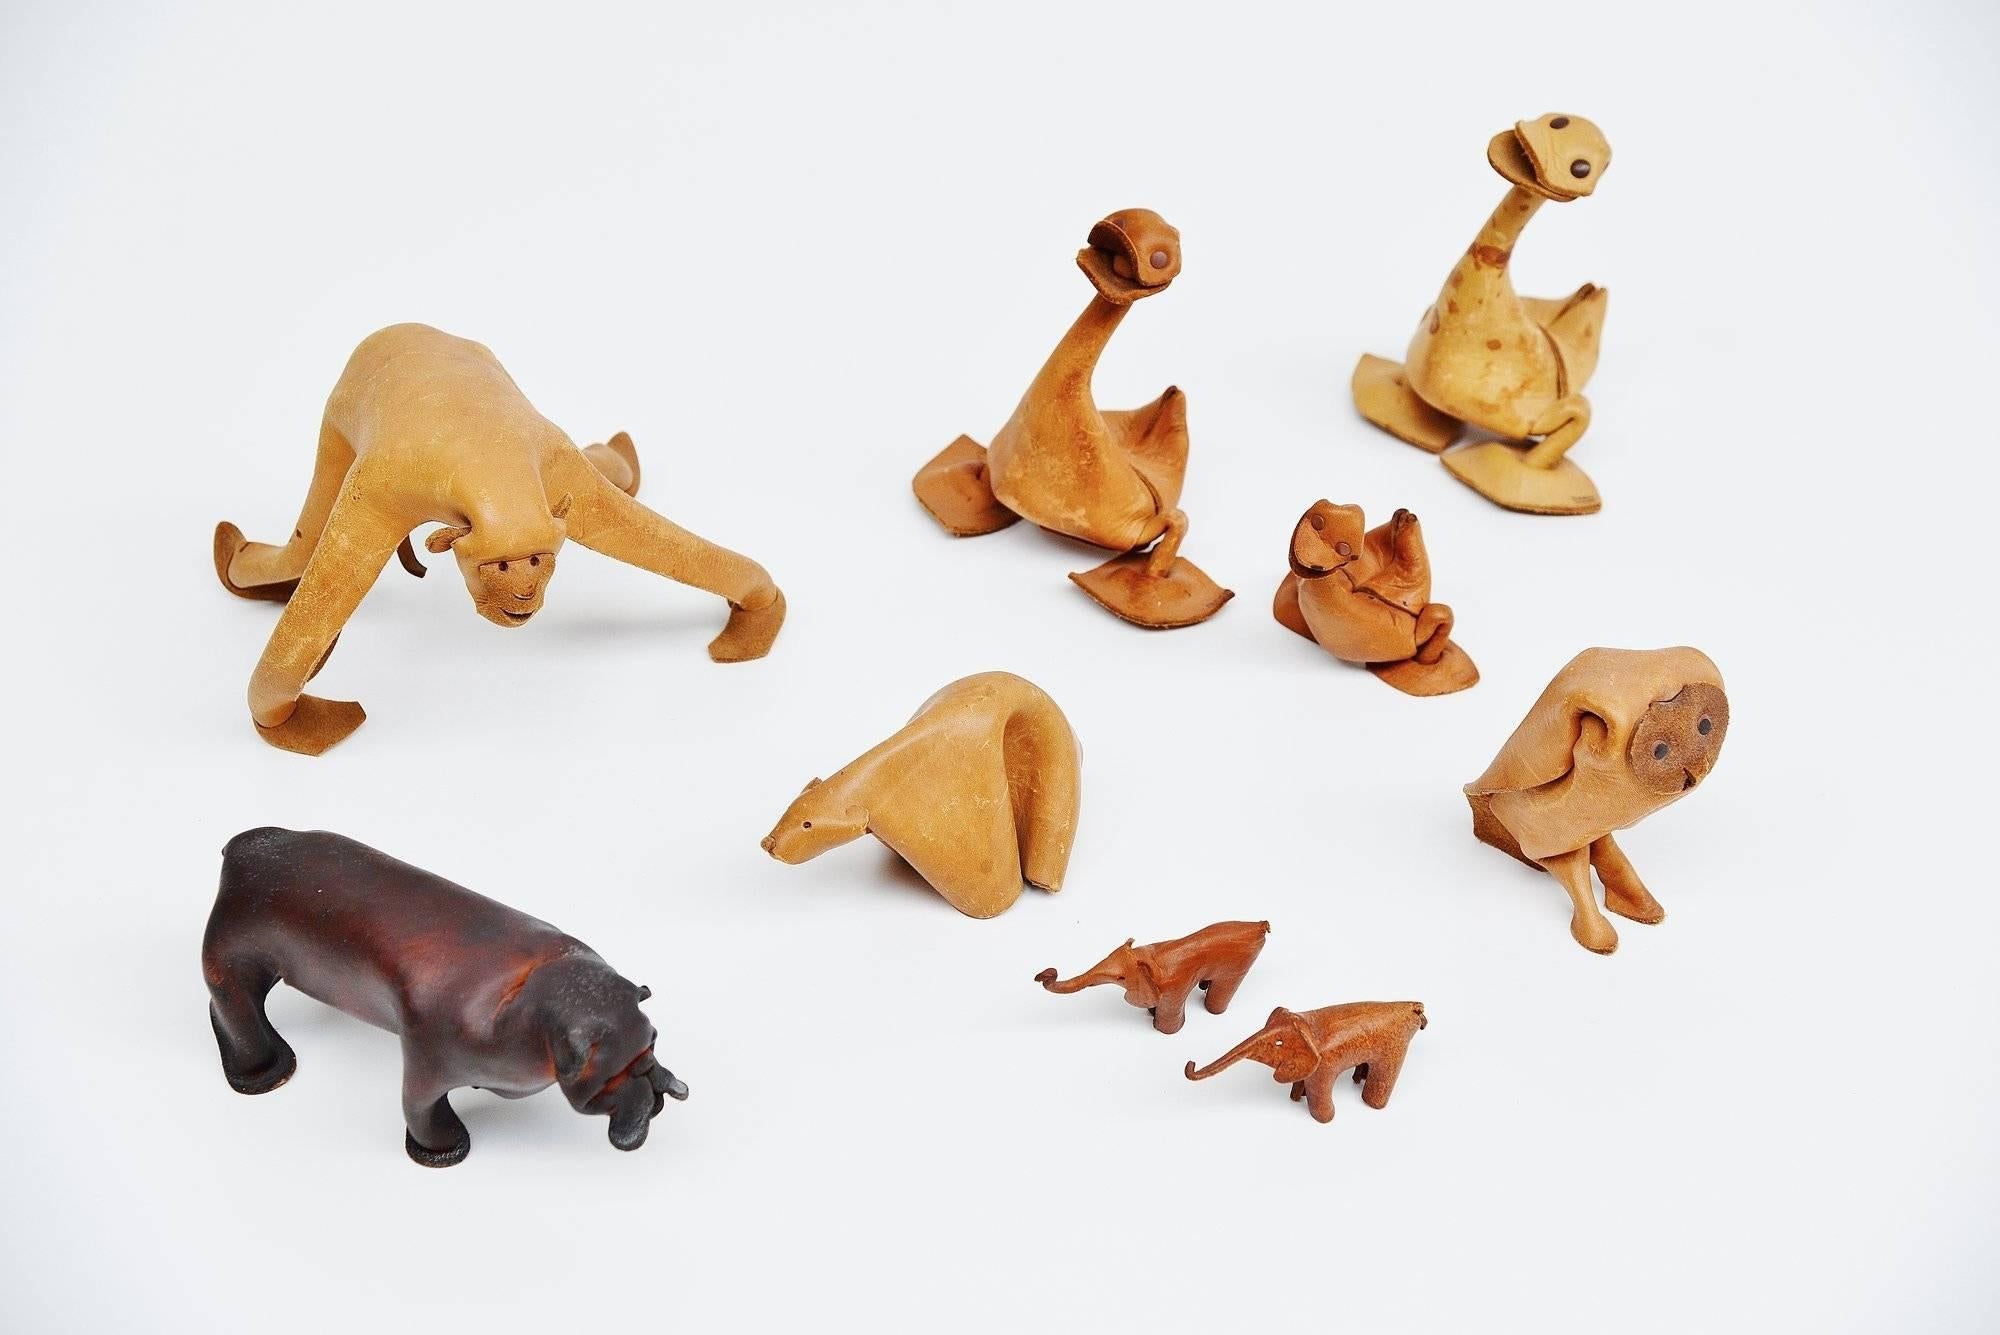 This is for a set of leather sculpted animals made by German company Deru in the 1960s. This set includes a monkey, owl, polar bear, Pitbull, three ducks and two small elephants. Deru made several different leather animals in the 1960s. They are